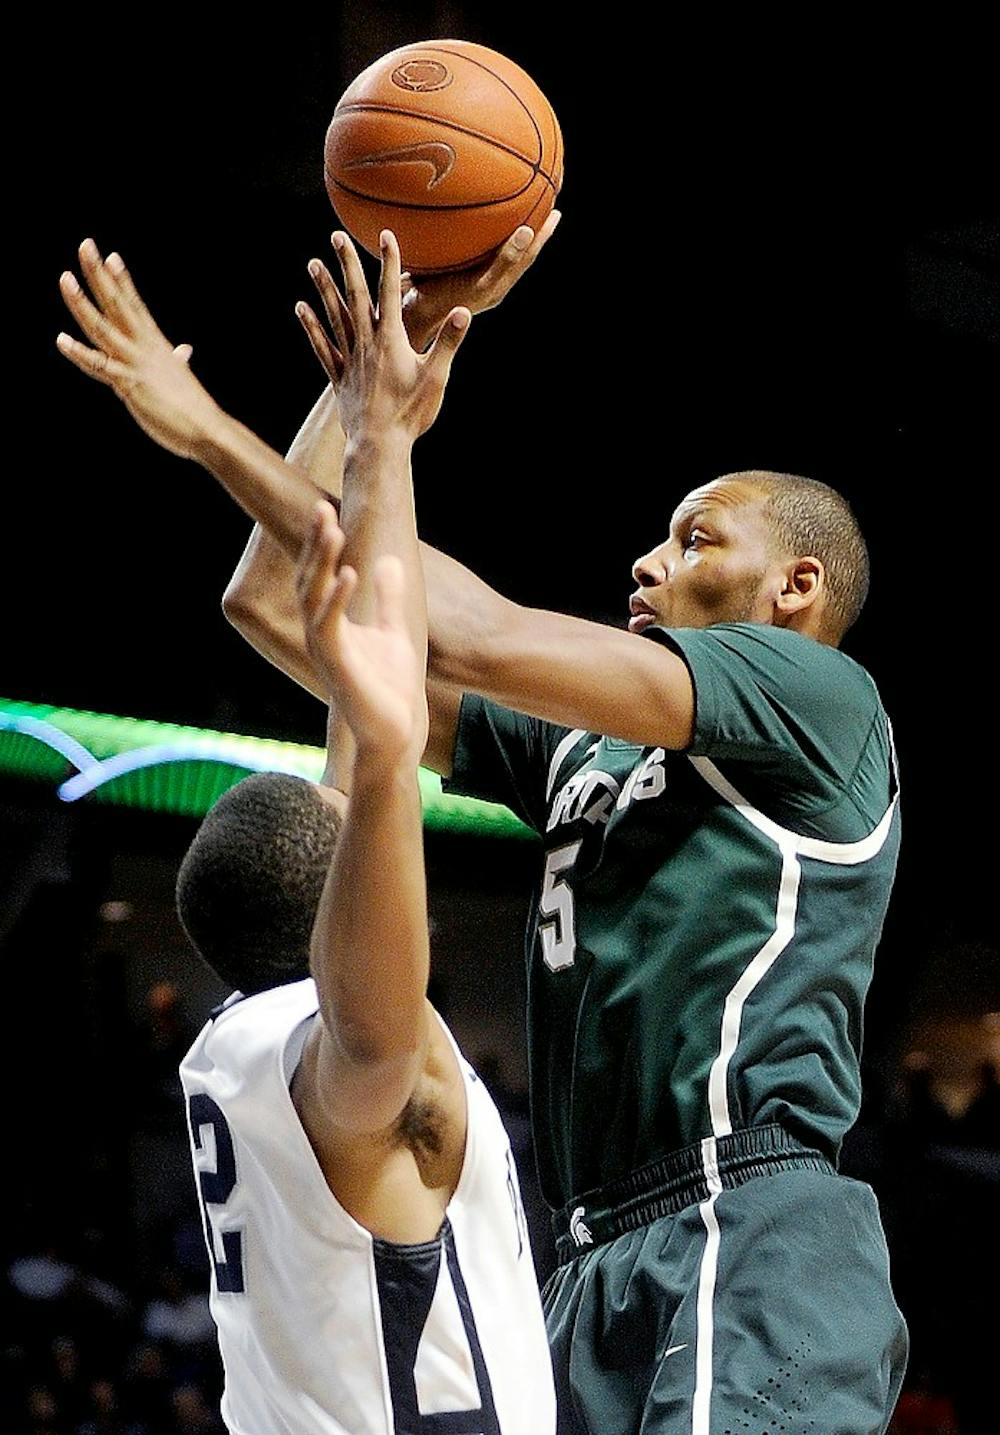 	<p>Michigan State Spartans&#8217; Adreian Payne shoots a basket over Penn State Nittany Lions&#8217; D.J. Newbill during the second half of a men&#8217;s college basketball game at the Bryce Jordan Center on Wednesday, January 16, 2013, in State College, Pennsylvania. The Spartans won, 81-72. Abby Drey/Centre Daily Times/MCT</p>